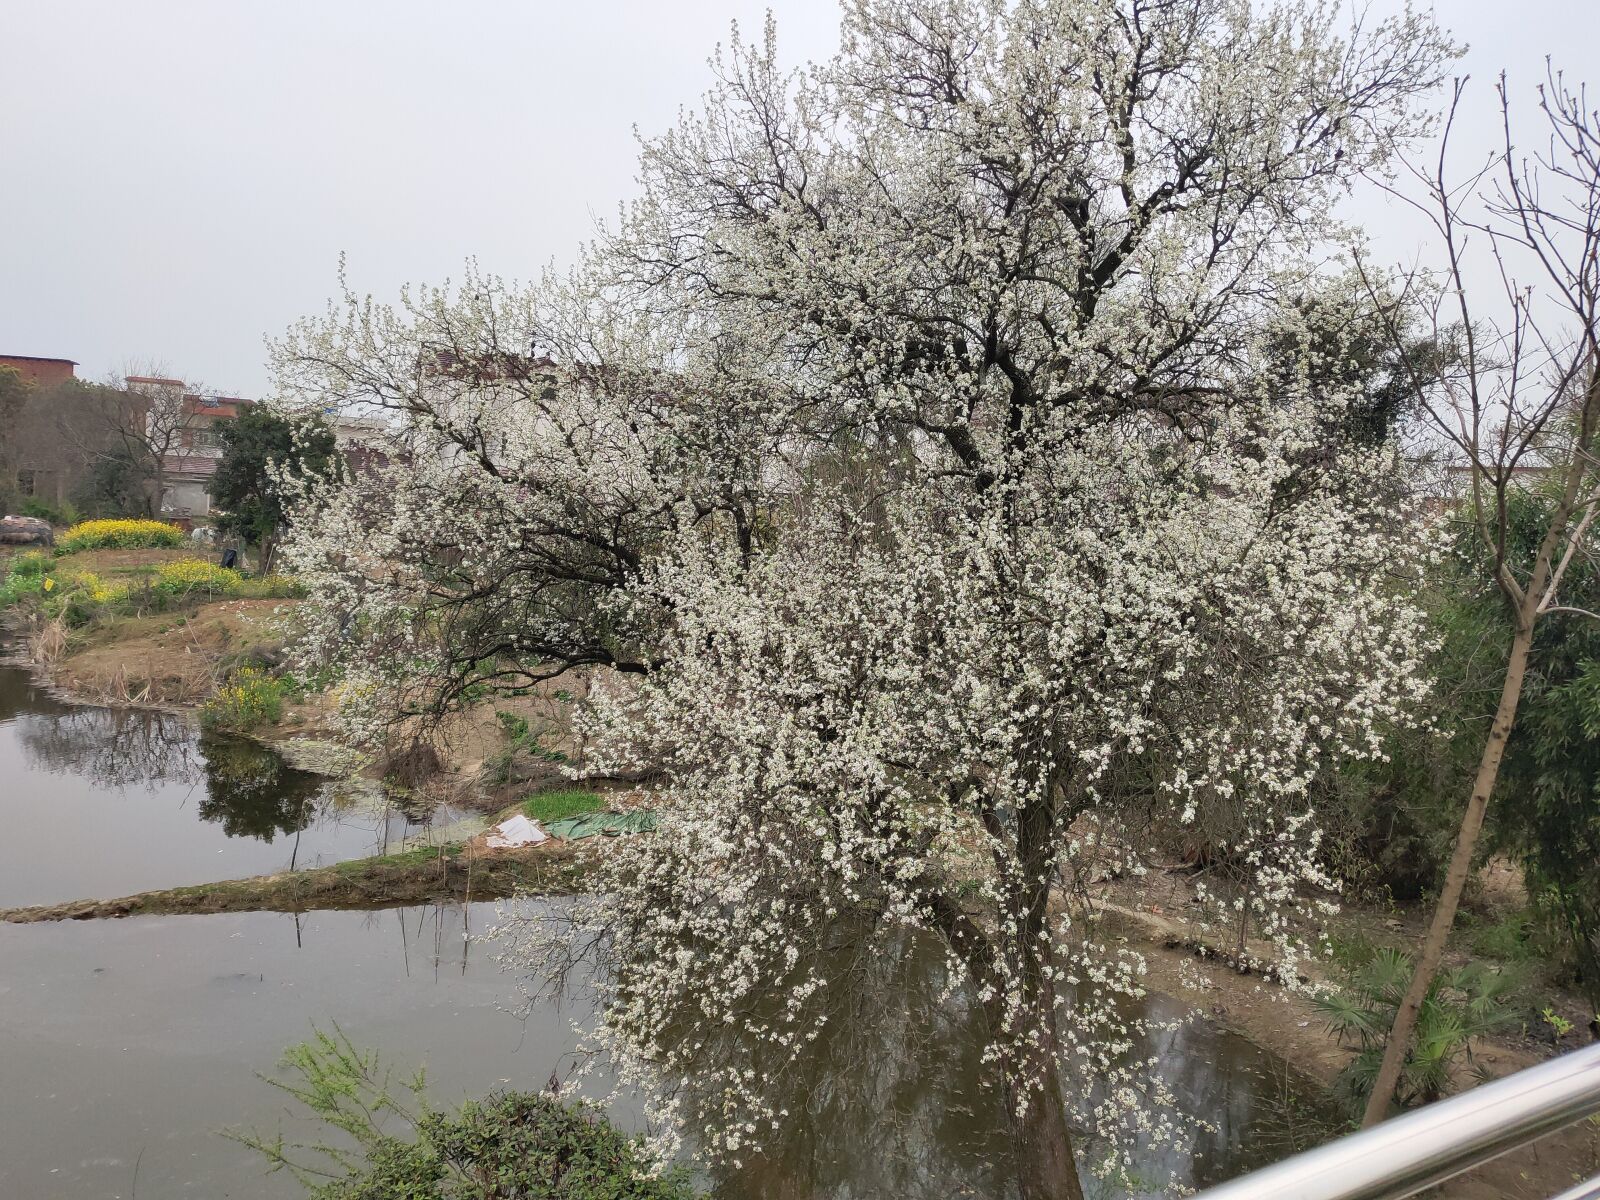 Meizu 16th sample photo. Spring, flower, free photography